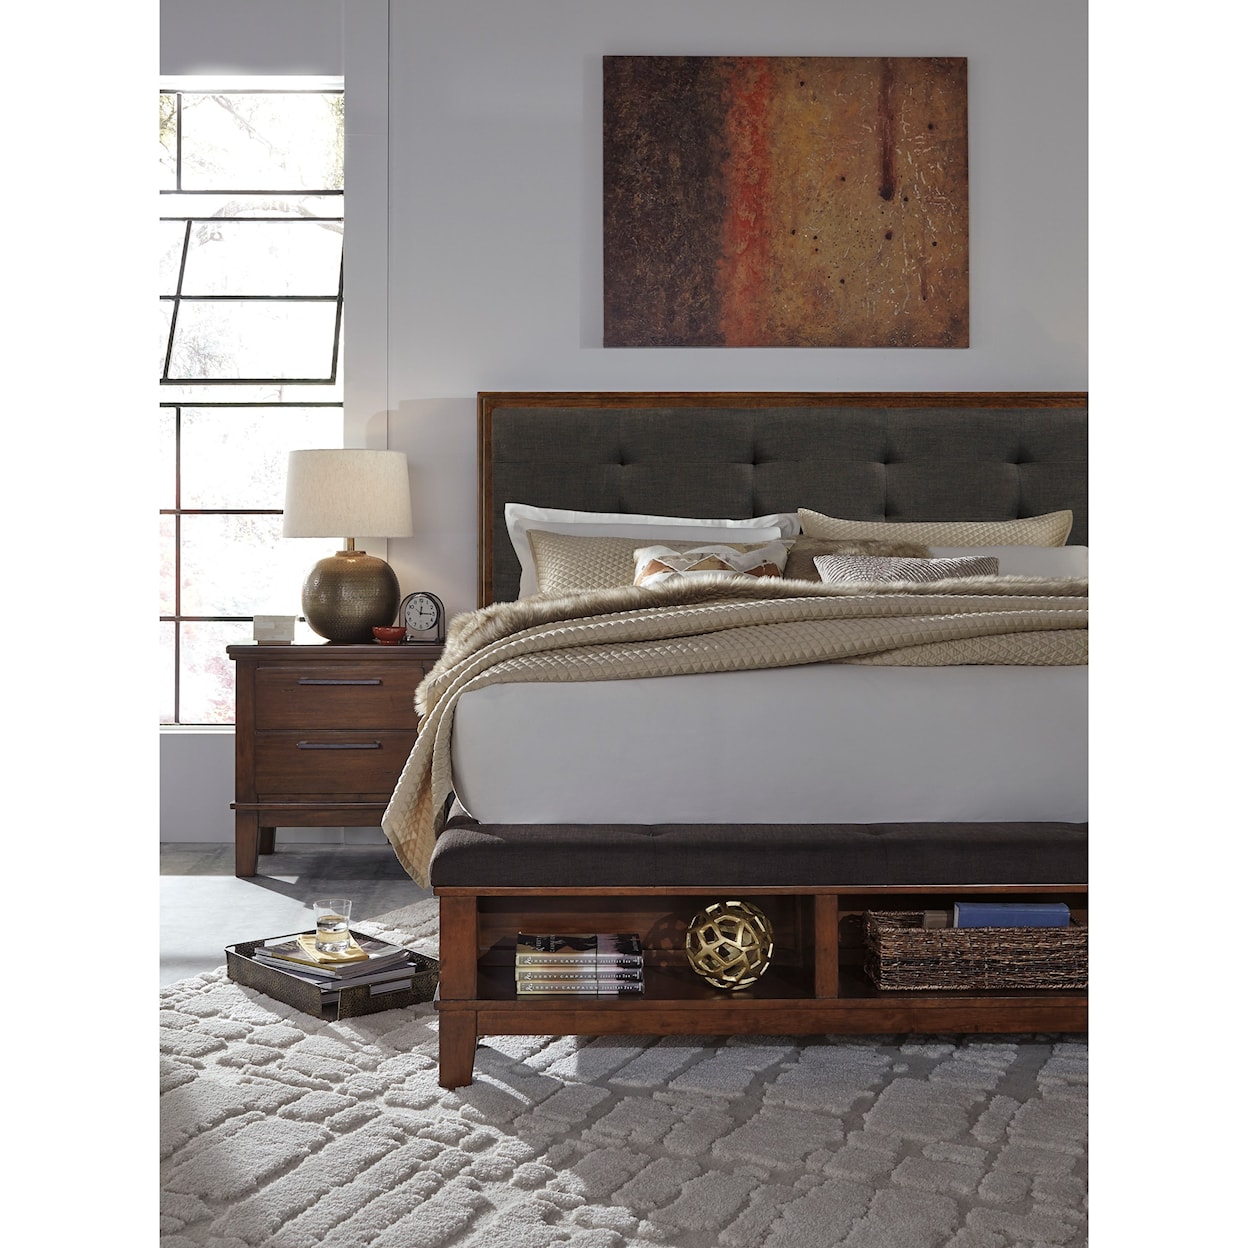 Signature Design by Ashley Ralene Queen Upholstered Bed with Storage Footboard